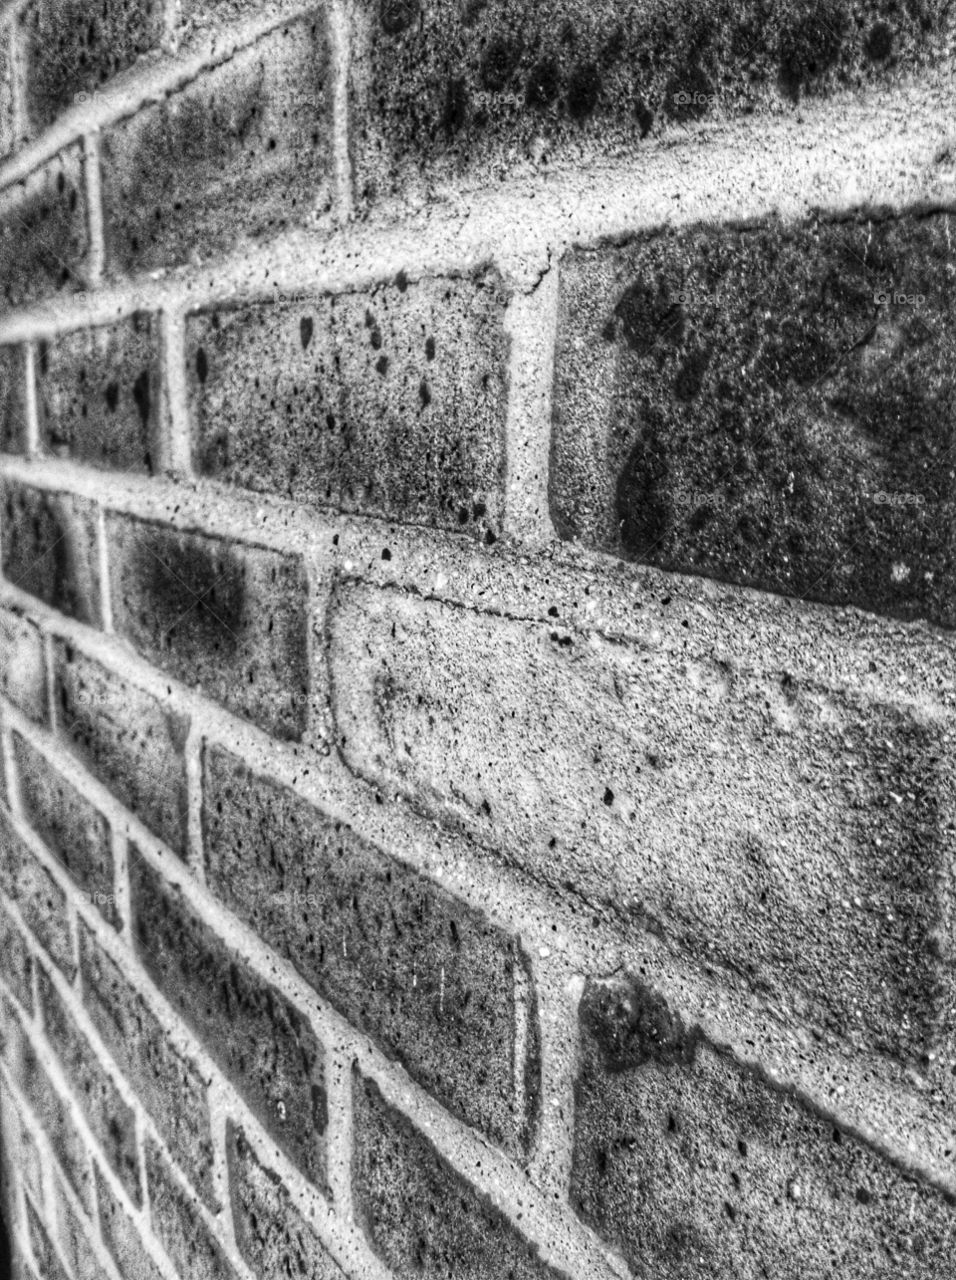 Close up of brickwork in black and white.